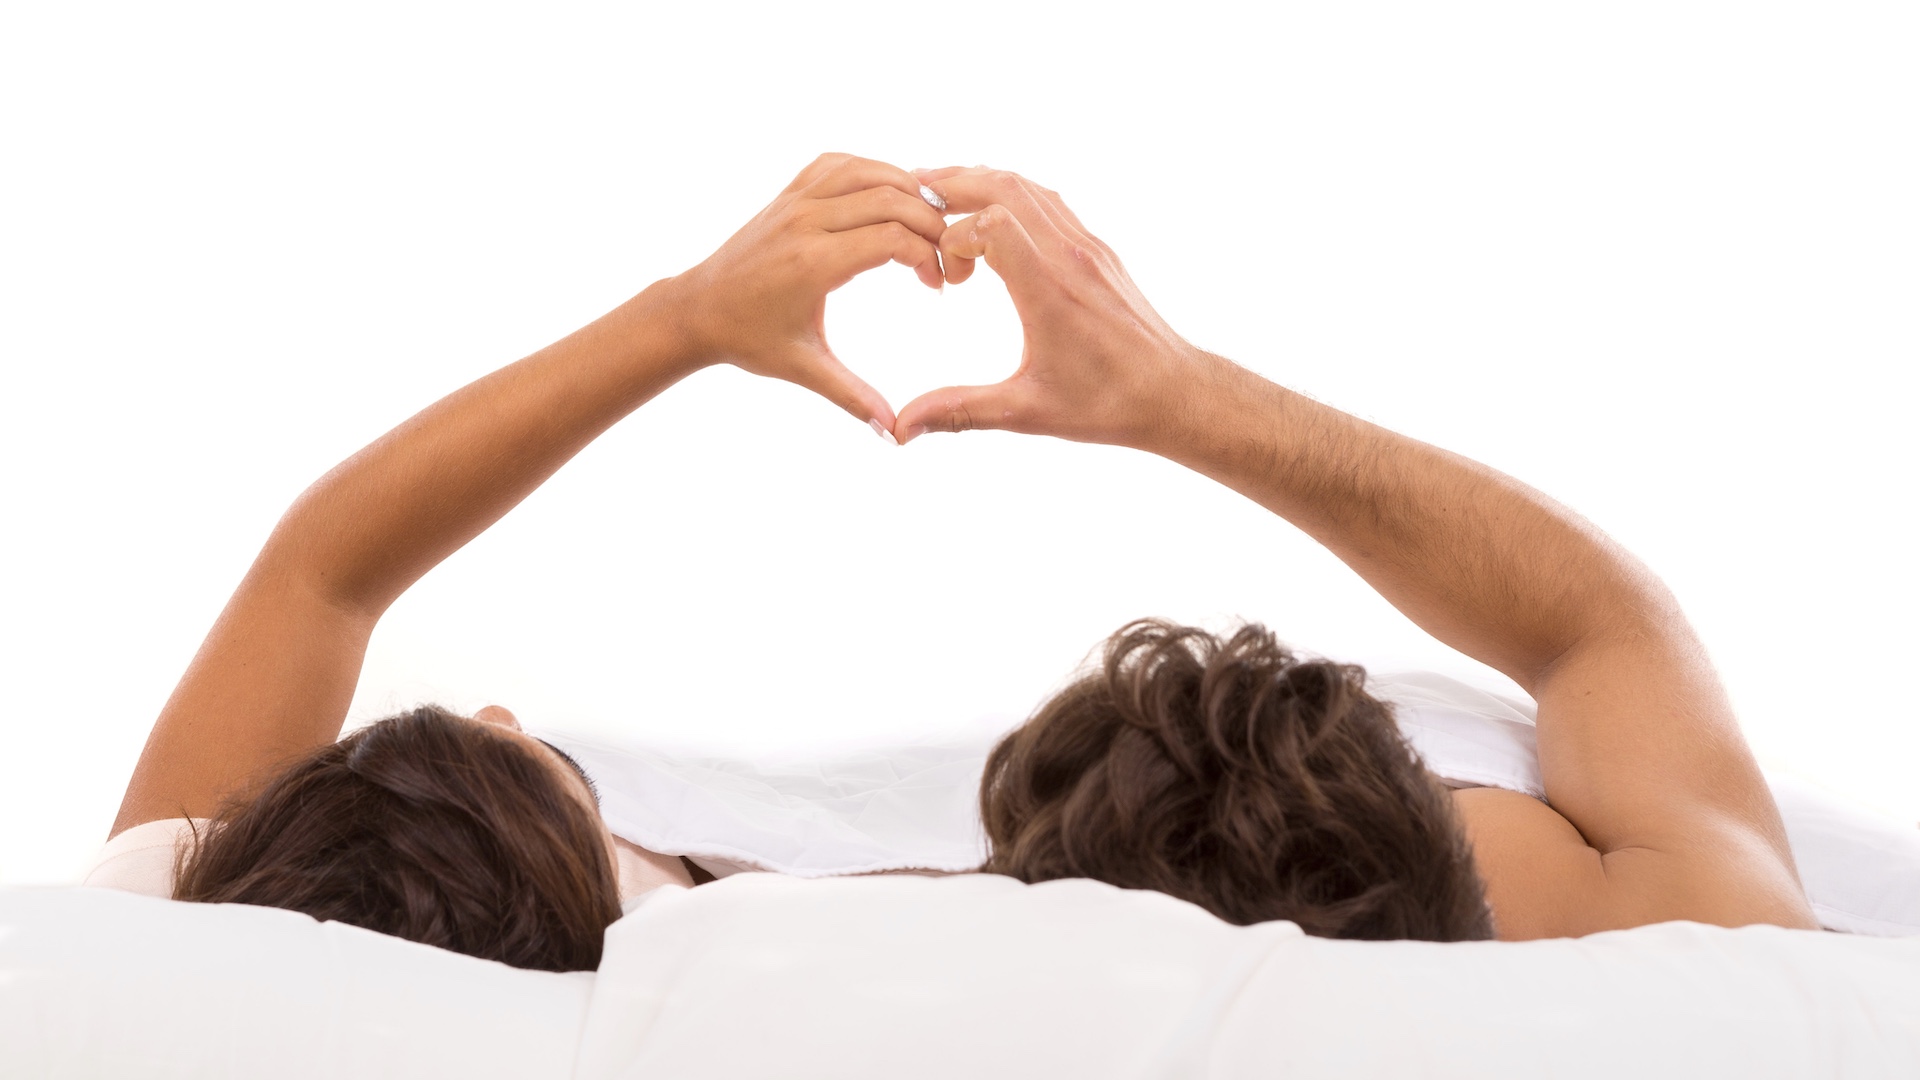 Married couple in bed making a heart sign with their hands